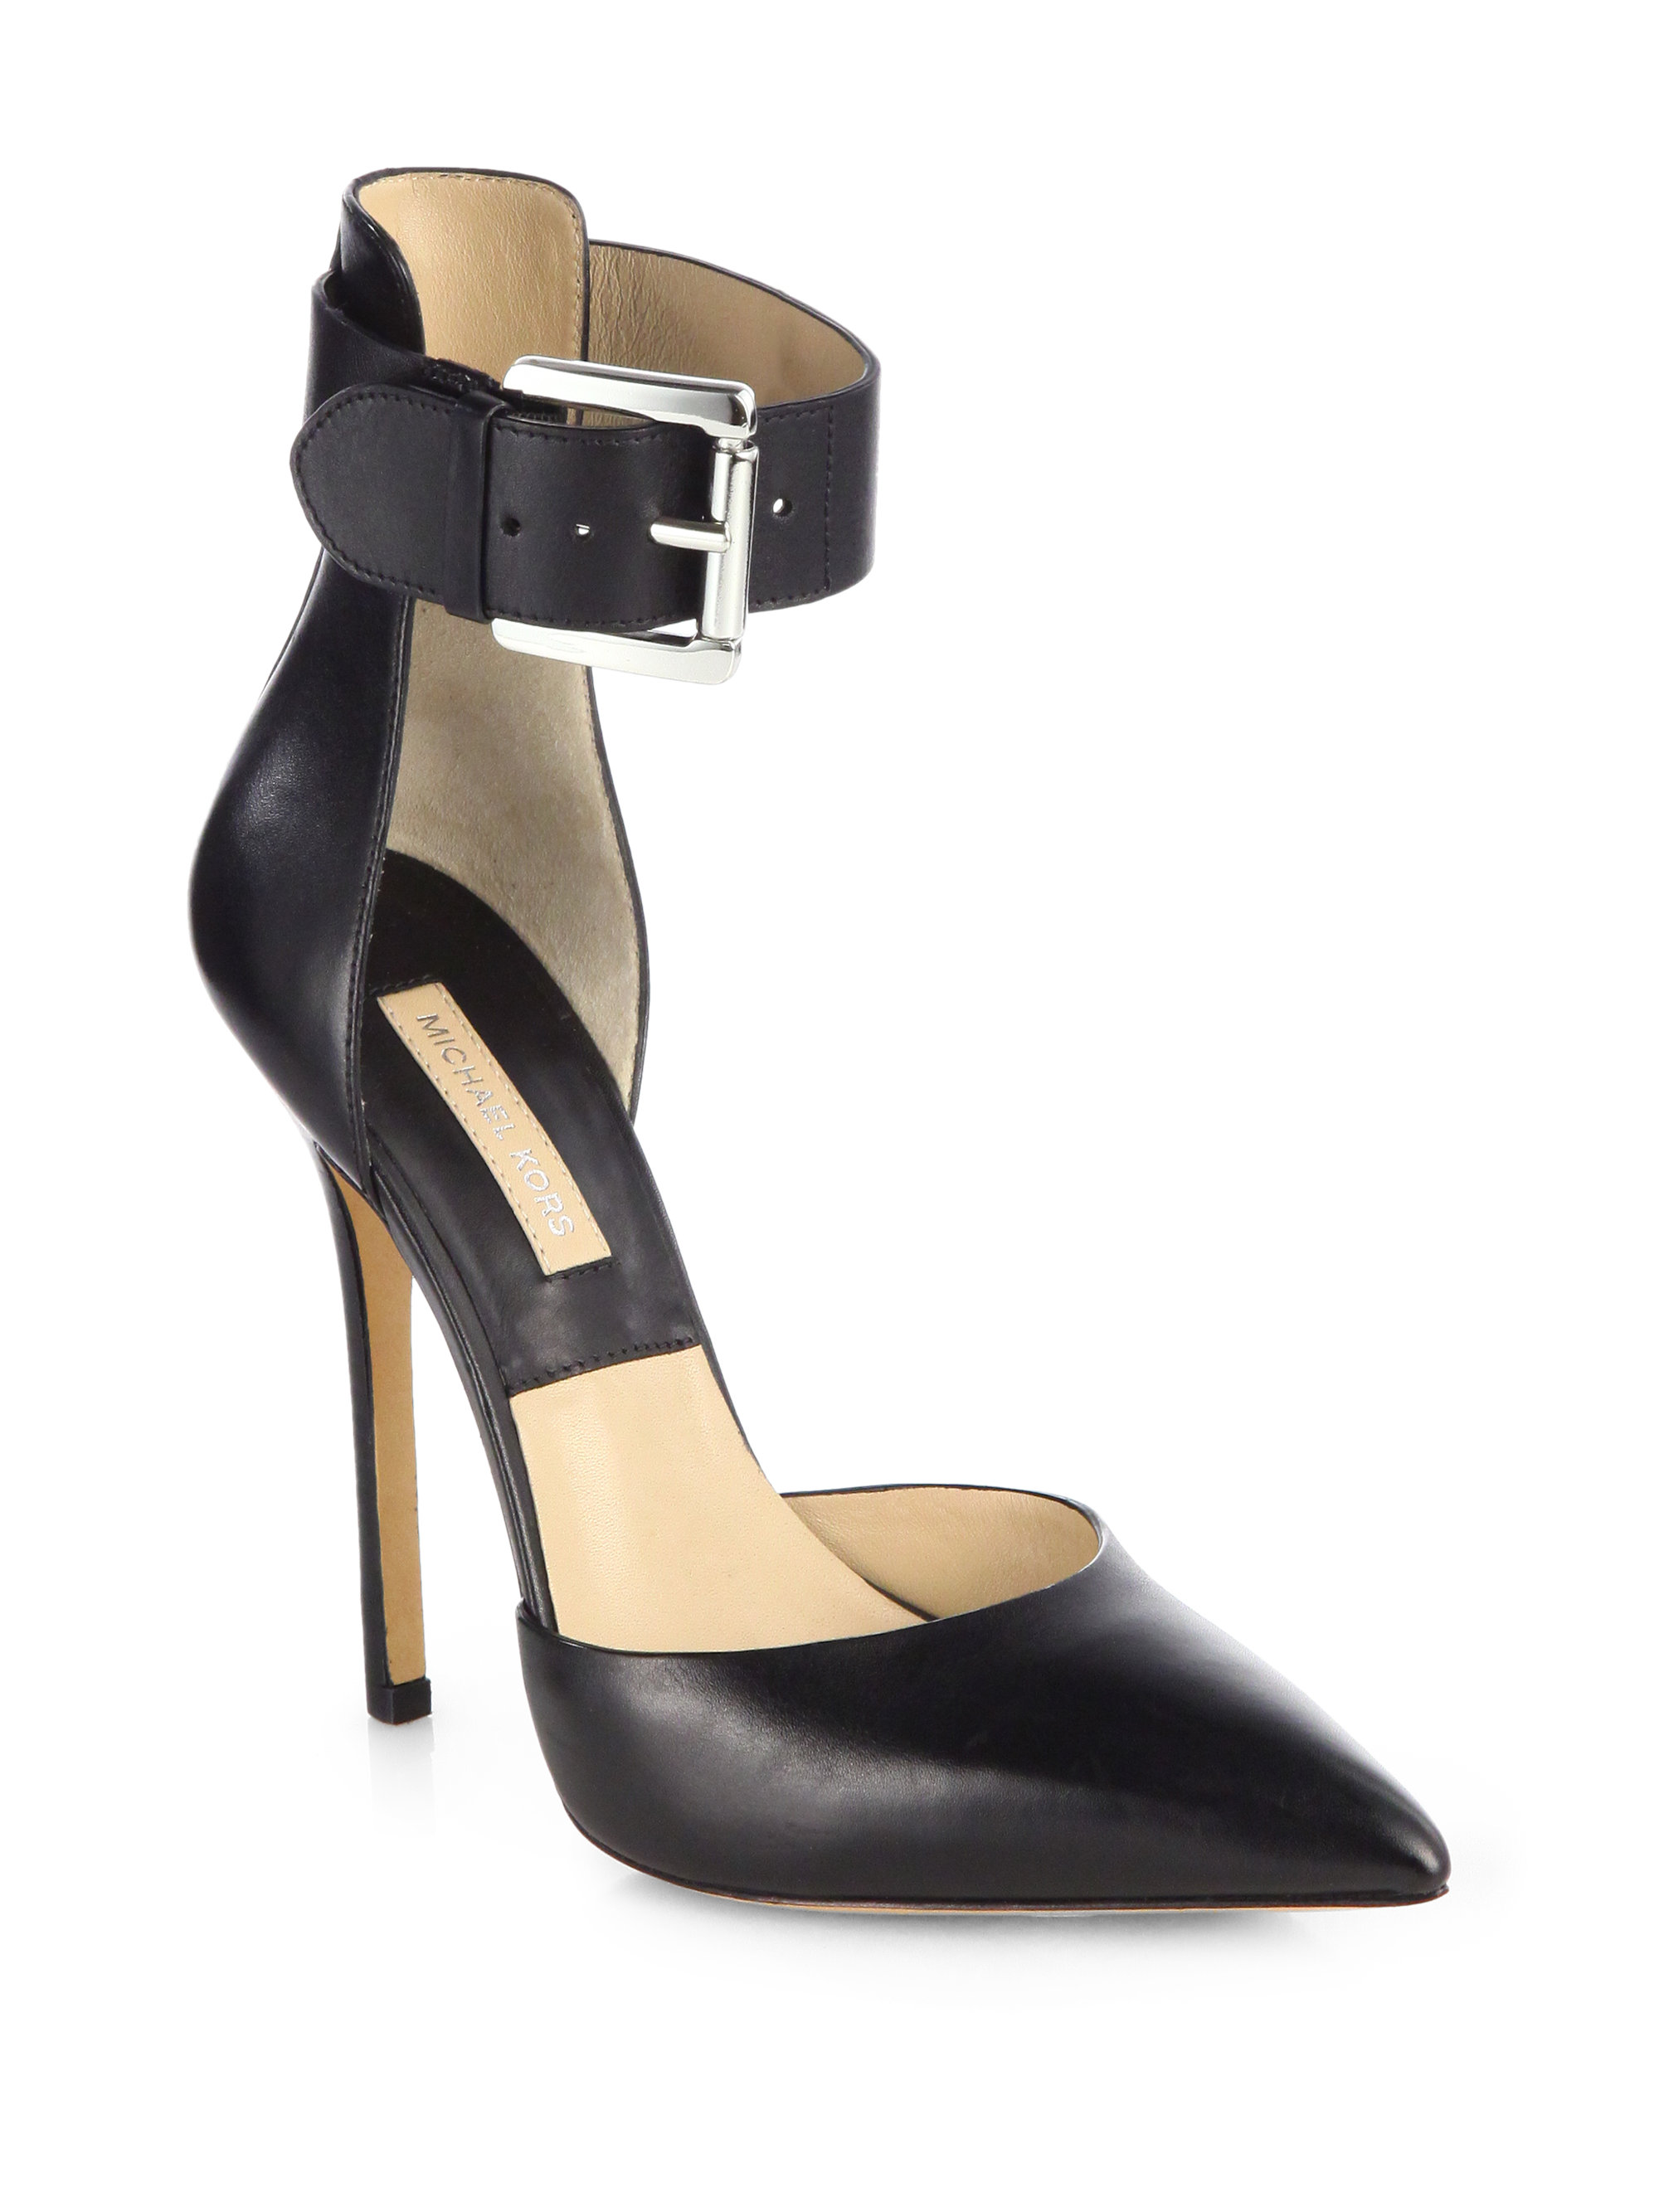 Lyst - Michael kors Adelaide Leather Ankle Strap Pumps in Black